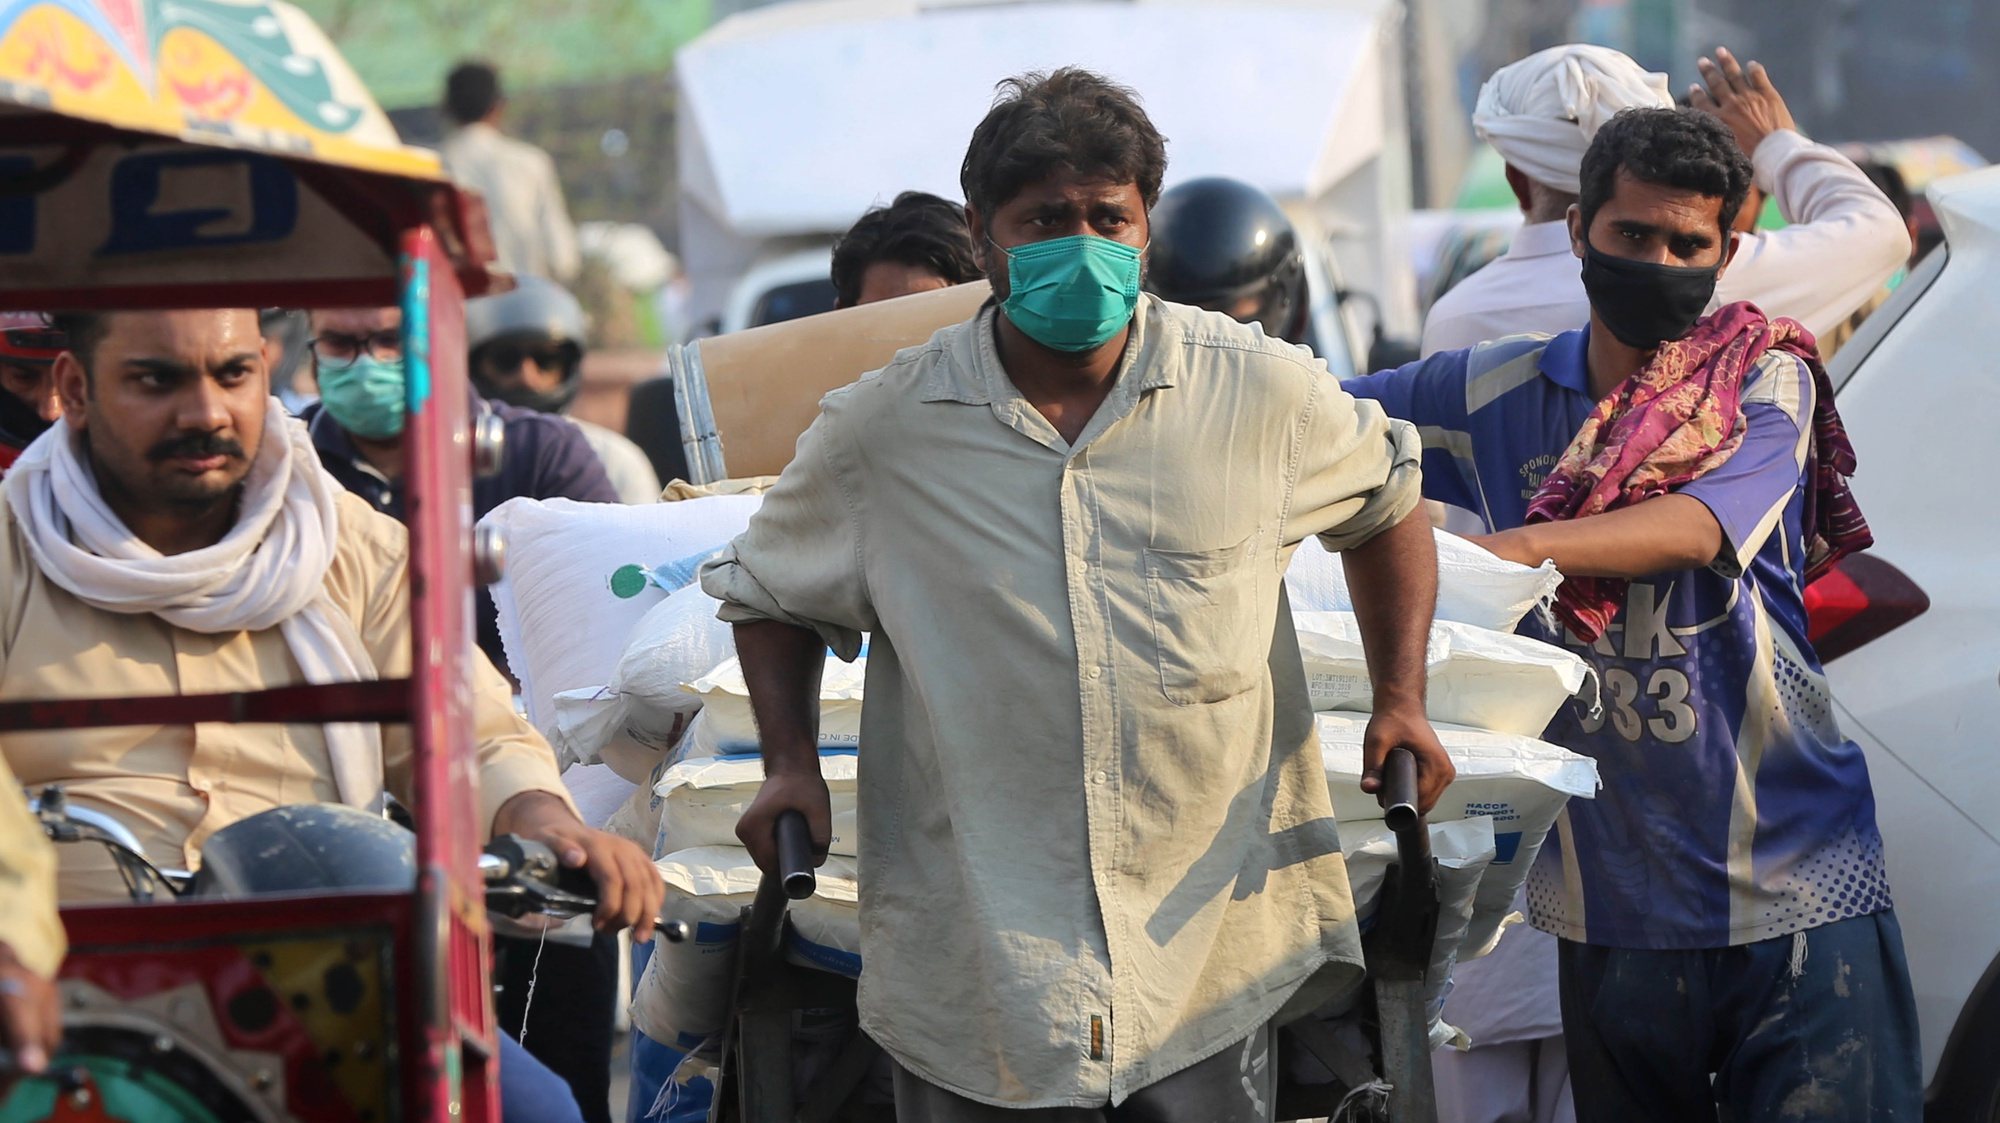 epa08467482 A Pakistani laborer transports products from a closed market during partial lockdown in Lahore, Pakistan, 05 June 2020. Countries around the world are taking increased measures to stem the widespread of the SARS-CoV-2 coronavirus which causes the Covid-19 disease.  EPA/RAHAT DAR